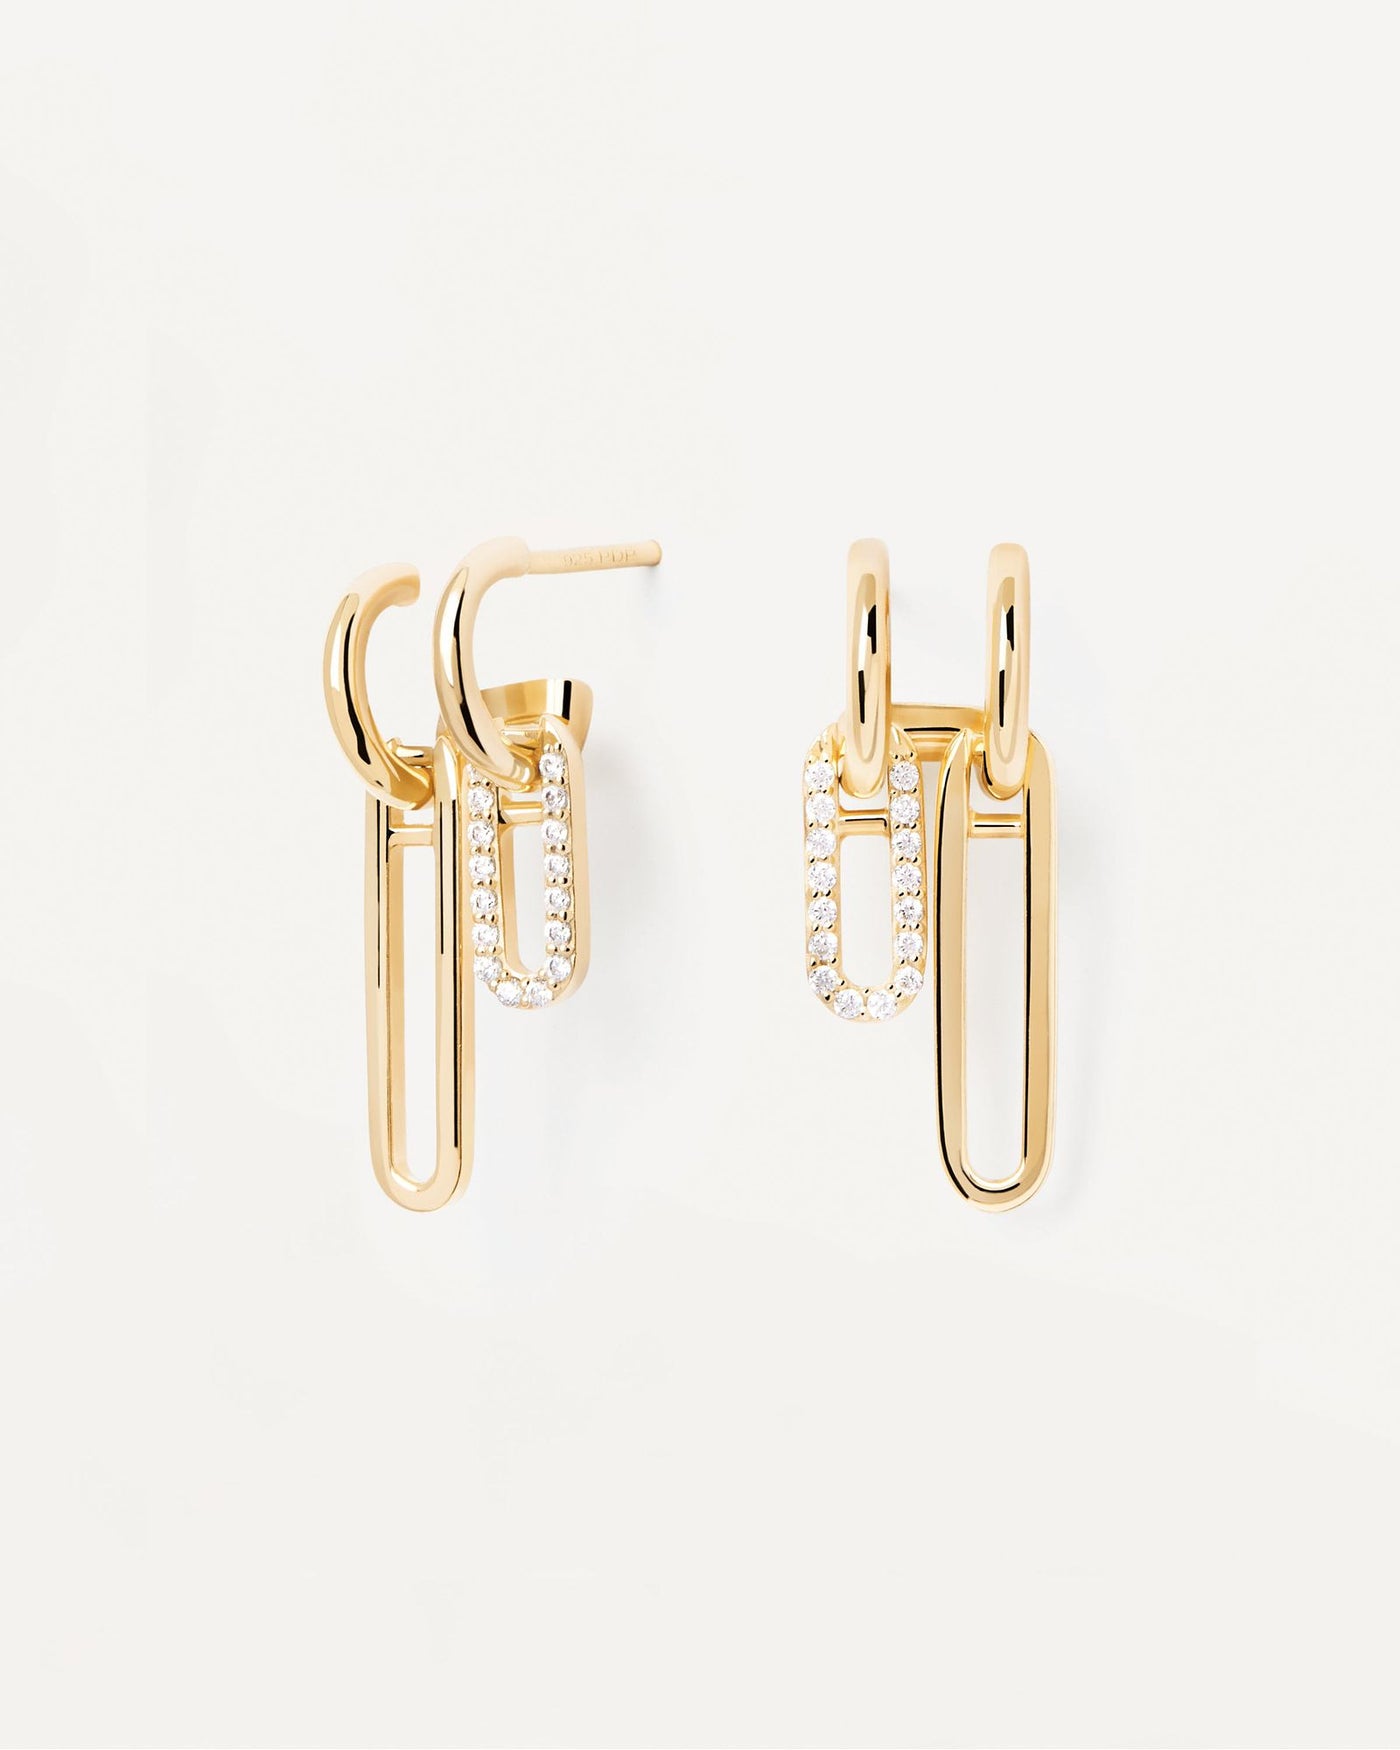 2024 Selection | Nexa Earrings. Asymetric long earrings in gold-plated silver and white zirconia. Get the latest arrival from PDPAOLA. Place your order safely and get this Best Seller. Free Shipping.